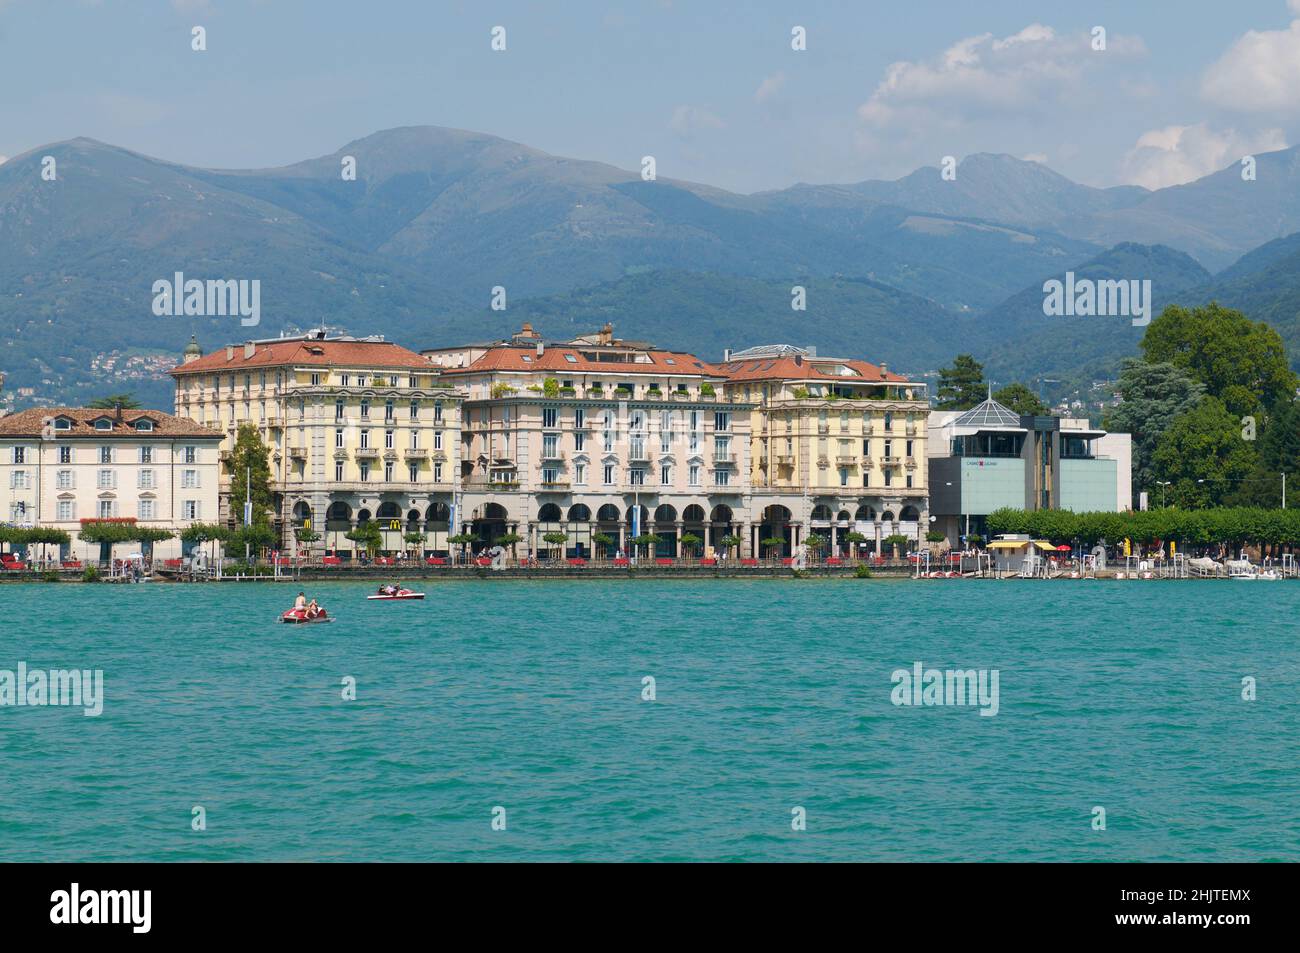 Lugano, Ticino, Switzerland - 21st August 2021 : Beautiful view of some old buildings of Lugano Switzerland seen from the lake on a sunny day in summe Stock Photo